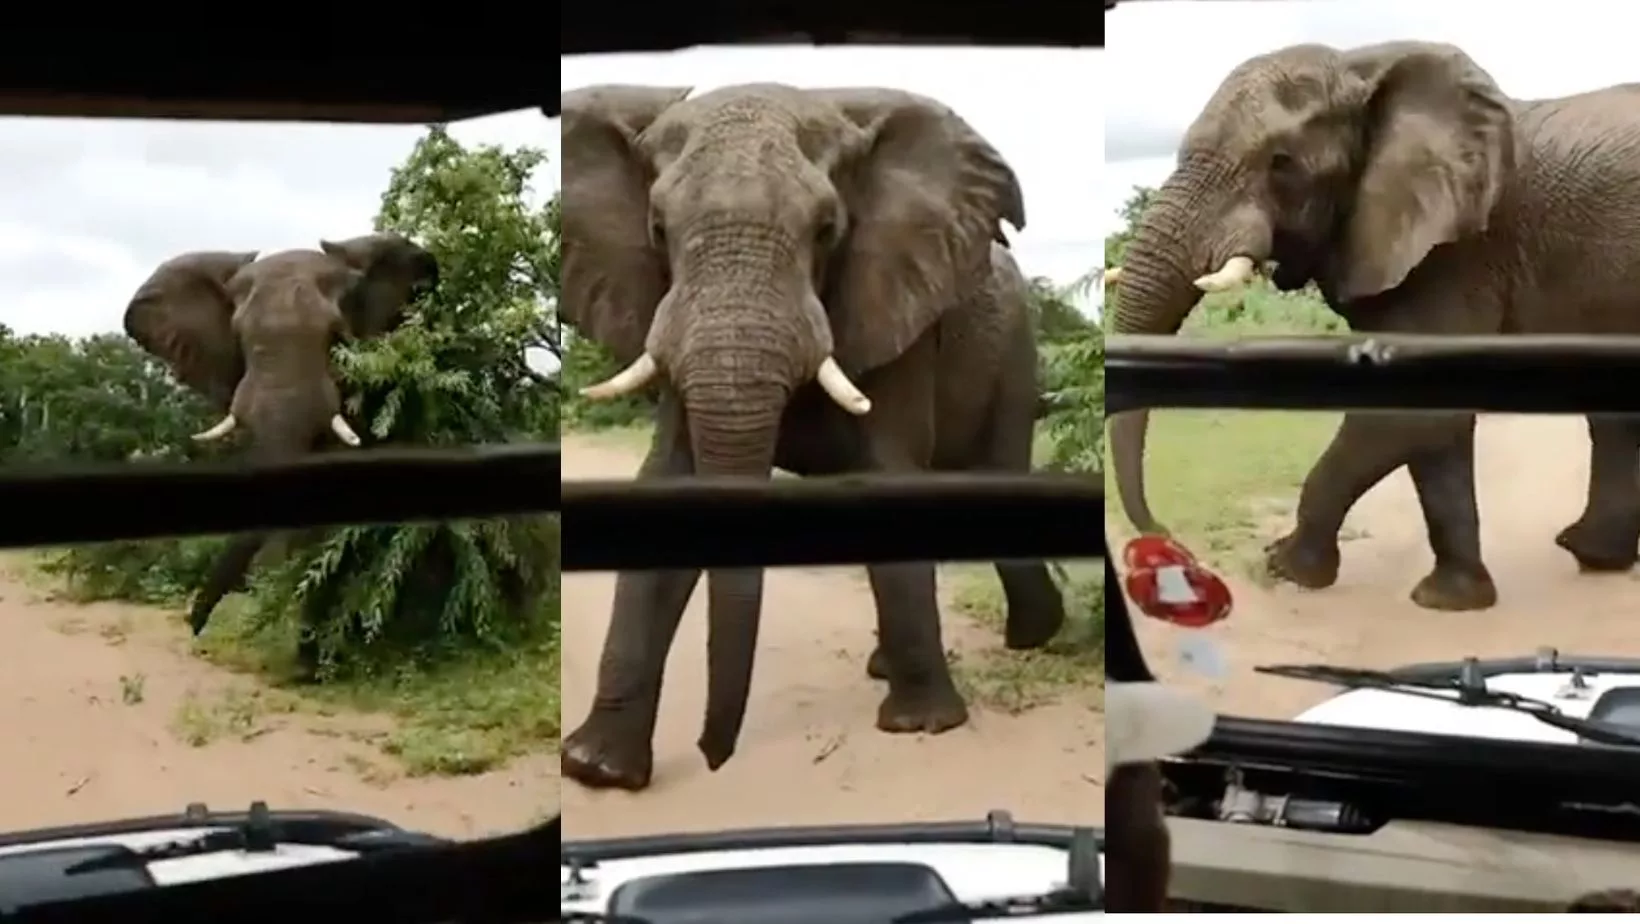 Elephant charges 4x4 in Chobe with South African journalists on board Jarastyle travel